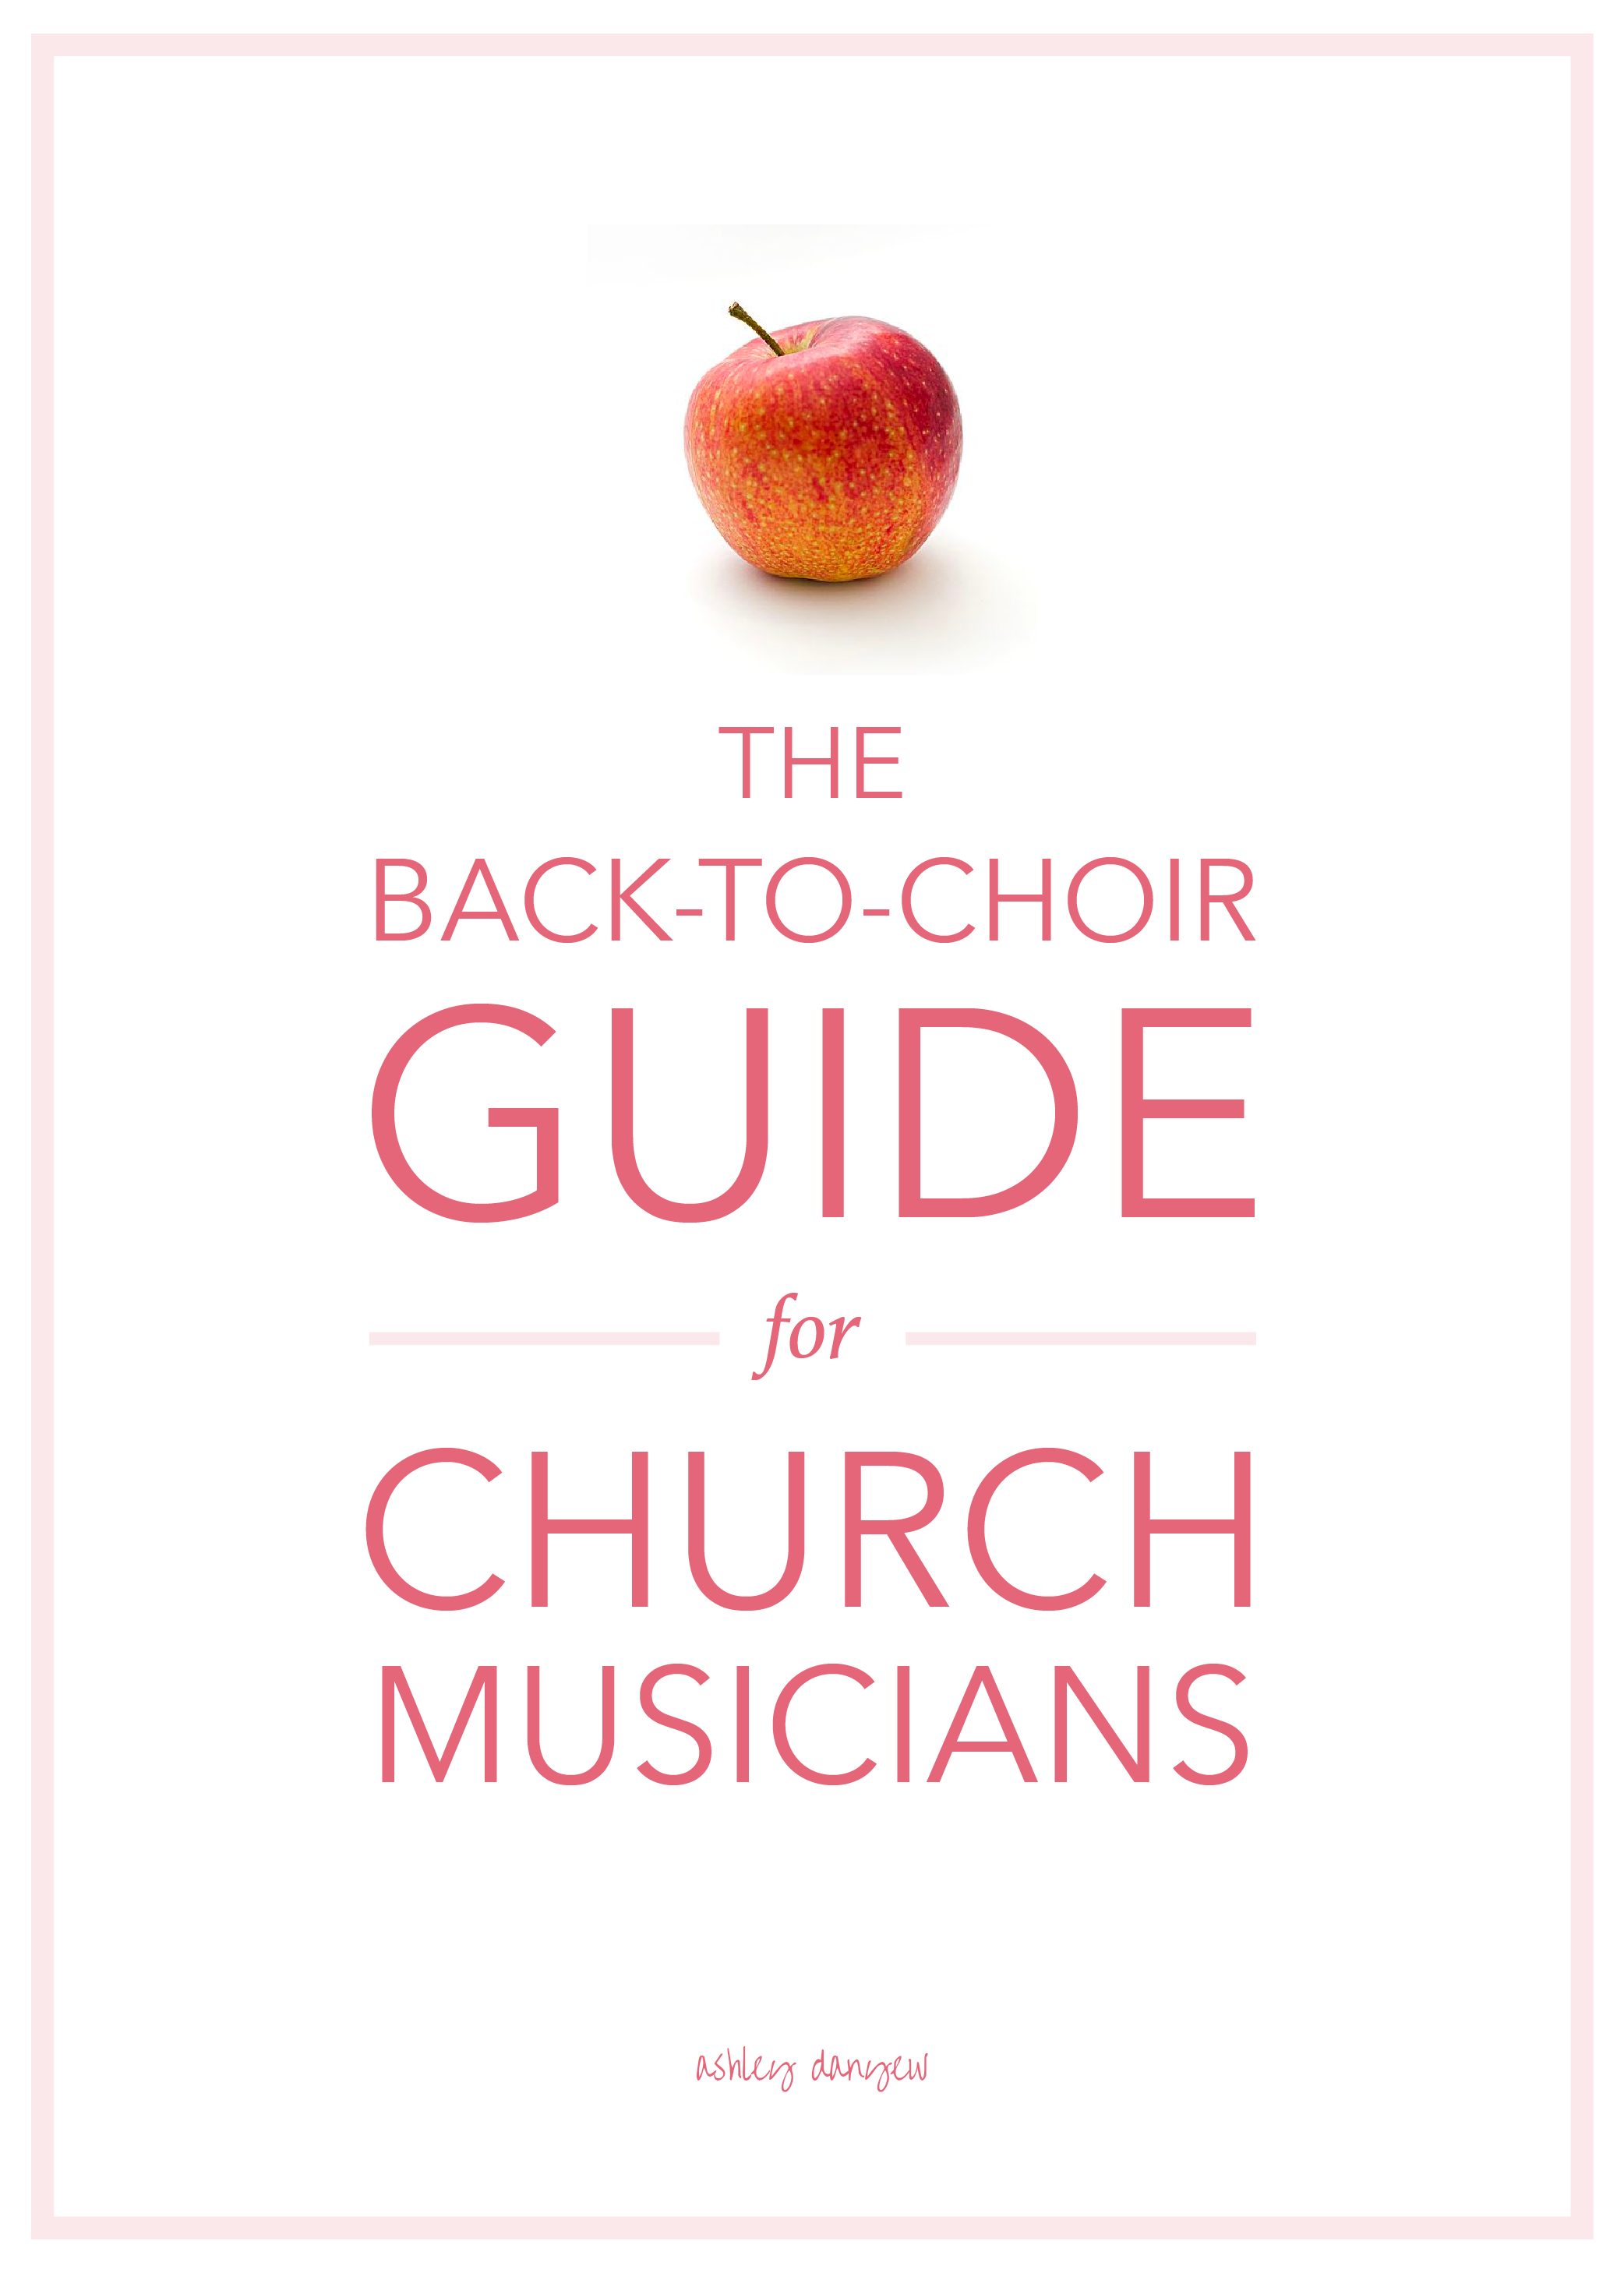 The Back-to-Choir Guide for Church Musicians